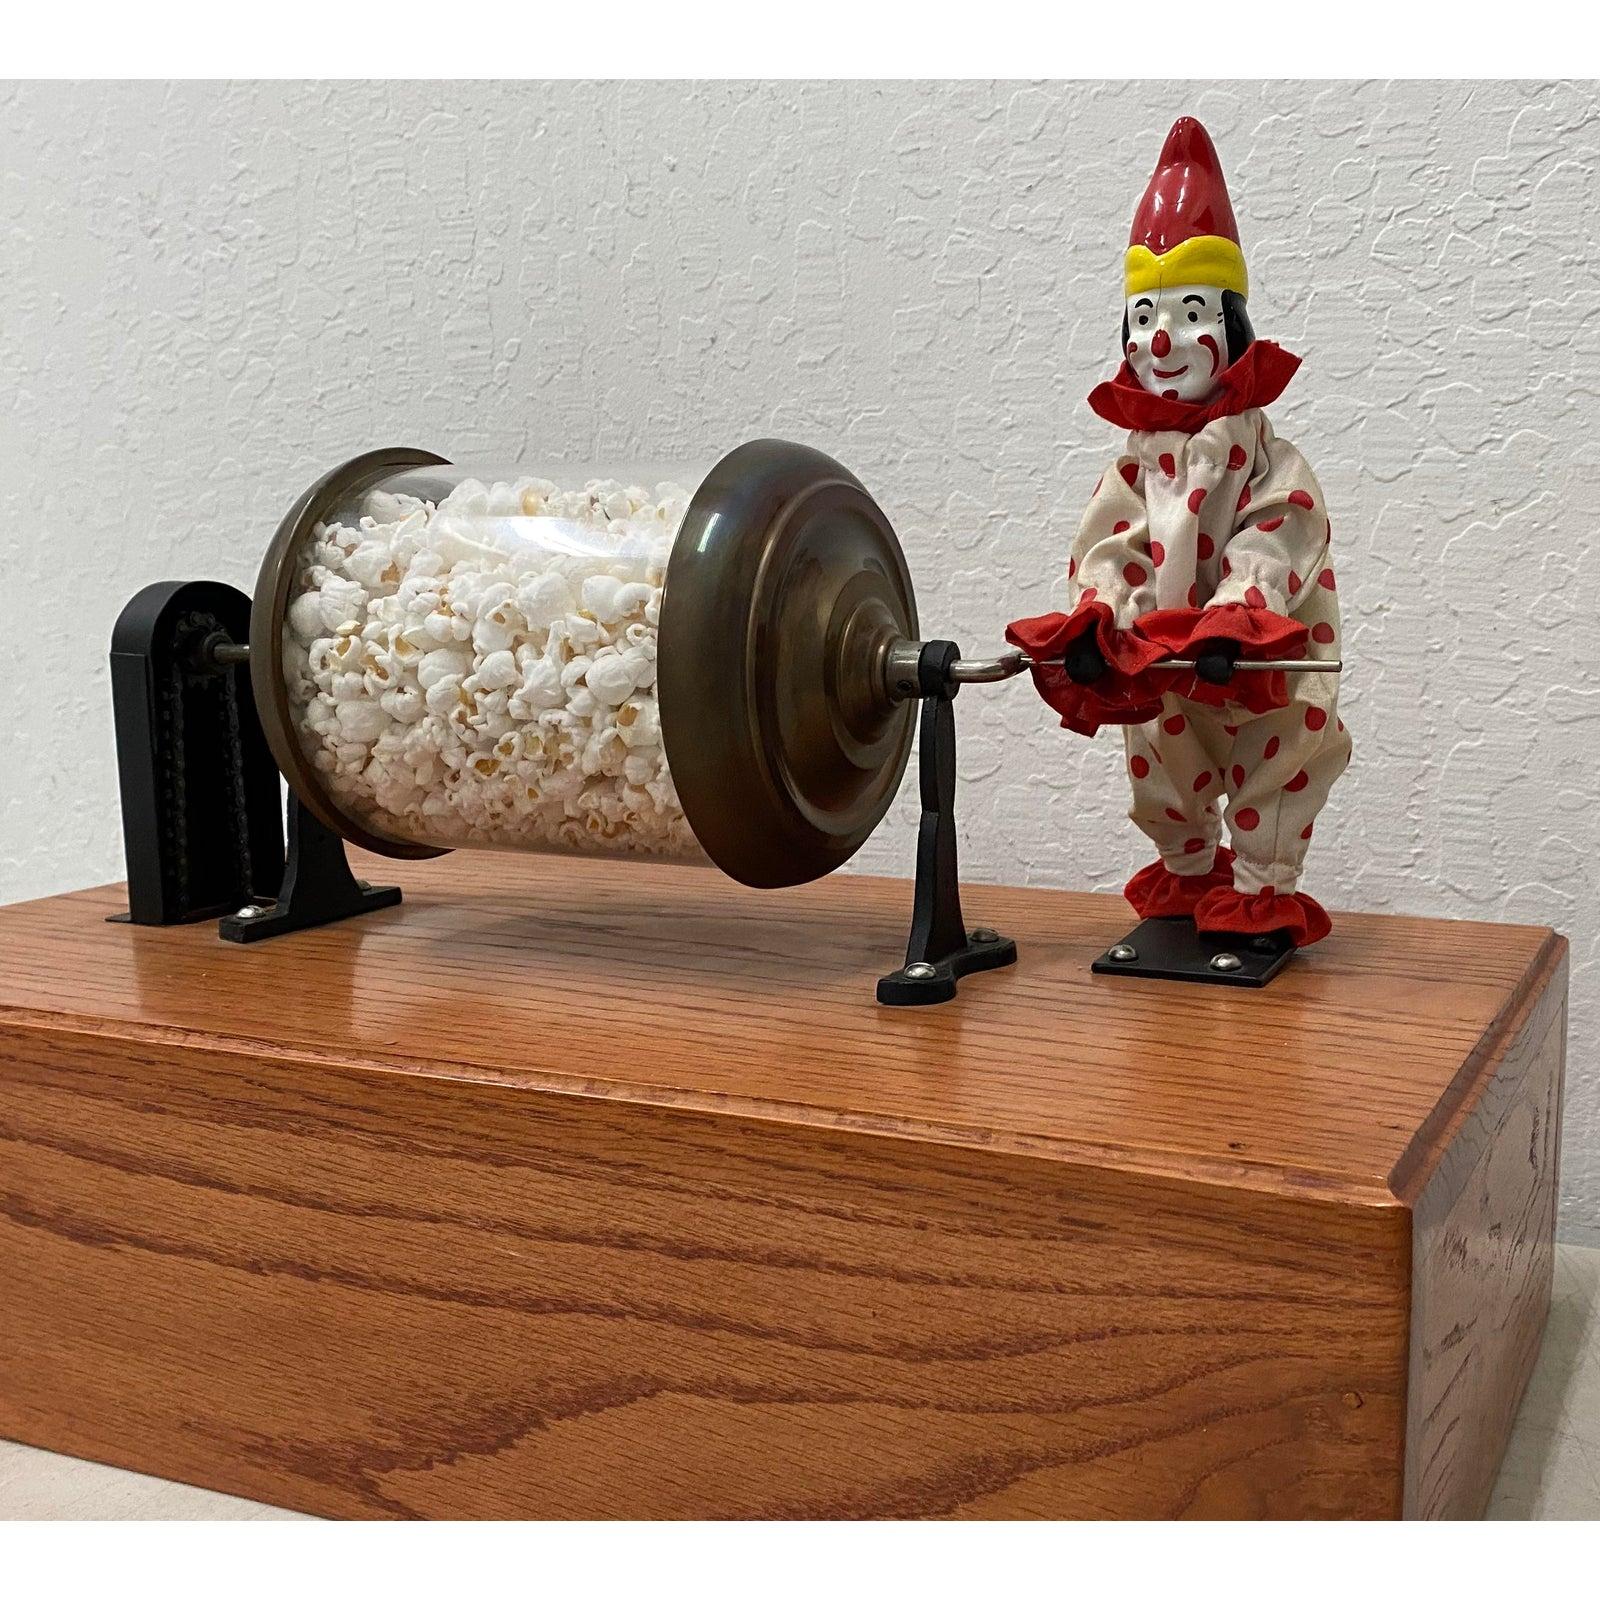 Vintage tosty rosty clown popcorn machine action figure, circa 1930

Vintage toy originally mounted to a popcorn machine. The clown would turn the popcorn as the machine popped the corn.

Mounted on a custom made wooden base.

Approximate